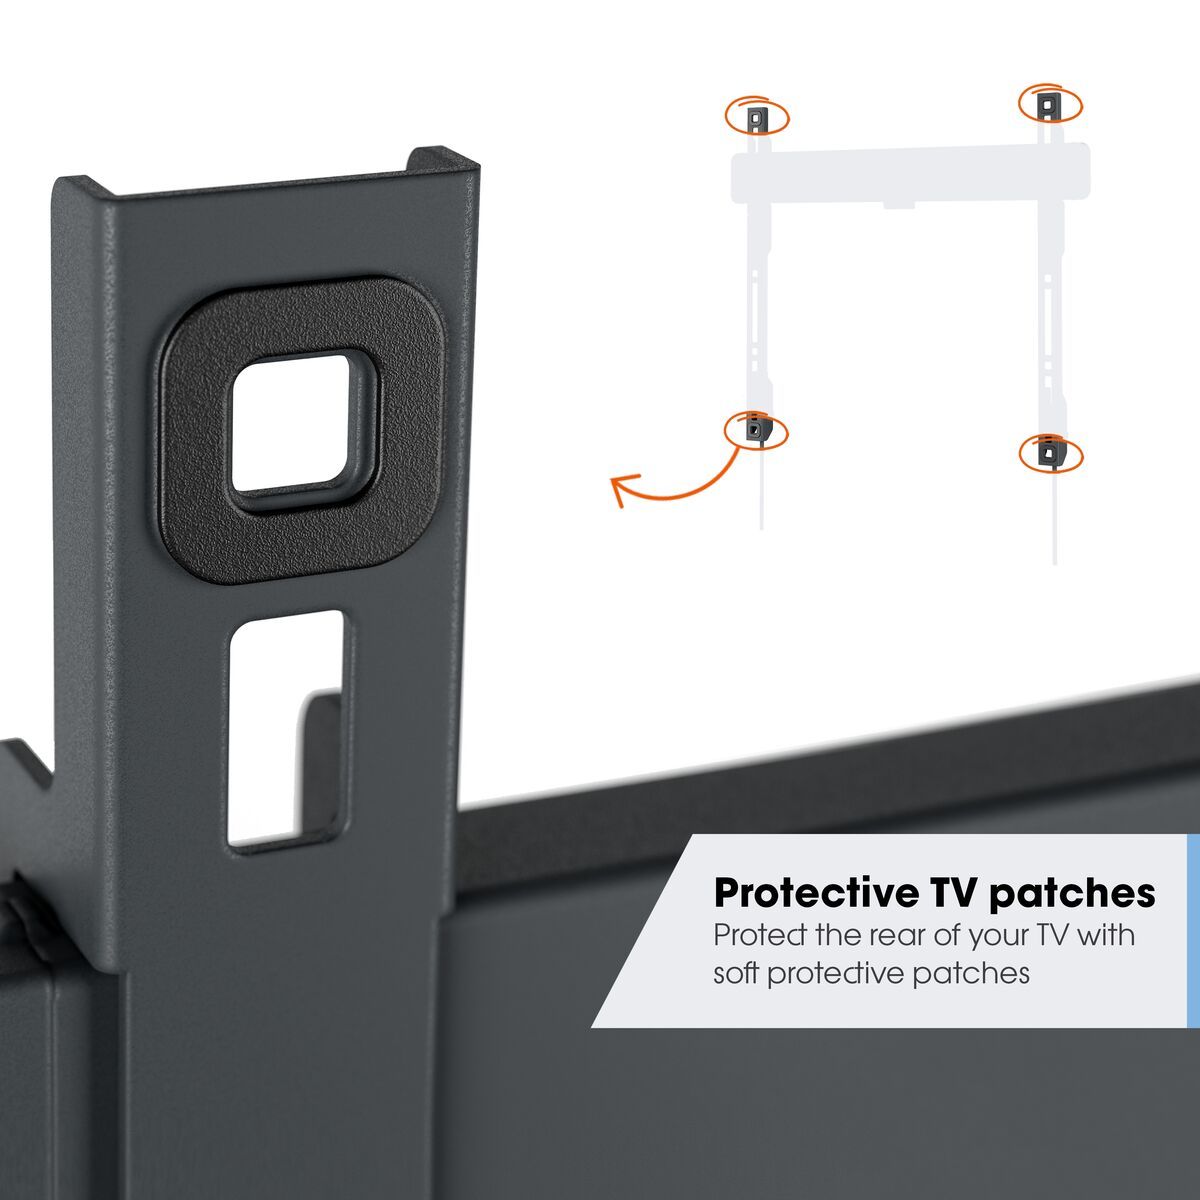 Vogel's TVM 3605 Fixed TV Wall Mount - Suitable for 40 up to 100 inch TVs - USP